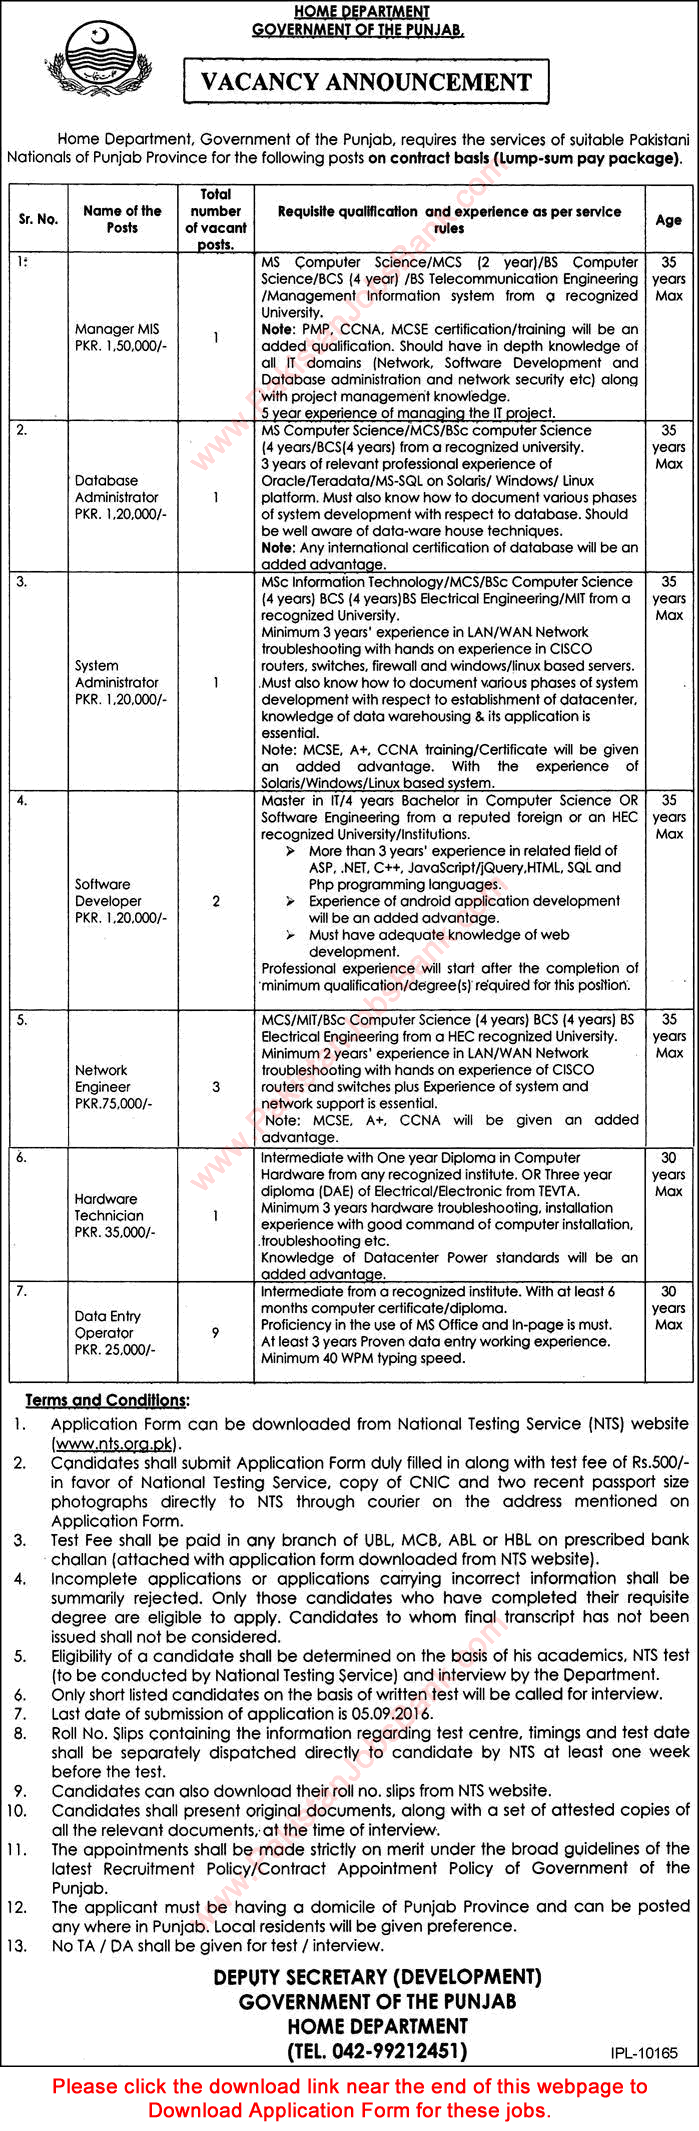 Home Department Punjab Jobs August 2016 NTS Application Form Data Entry Operators, Network Engineers & Others Latest